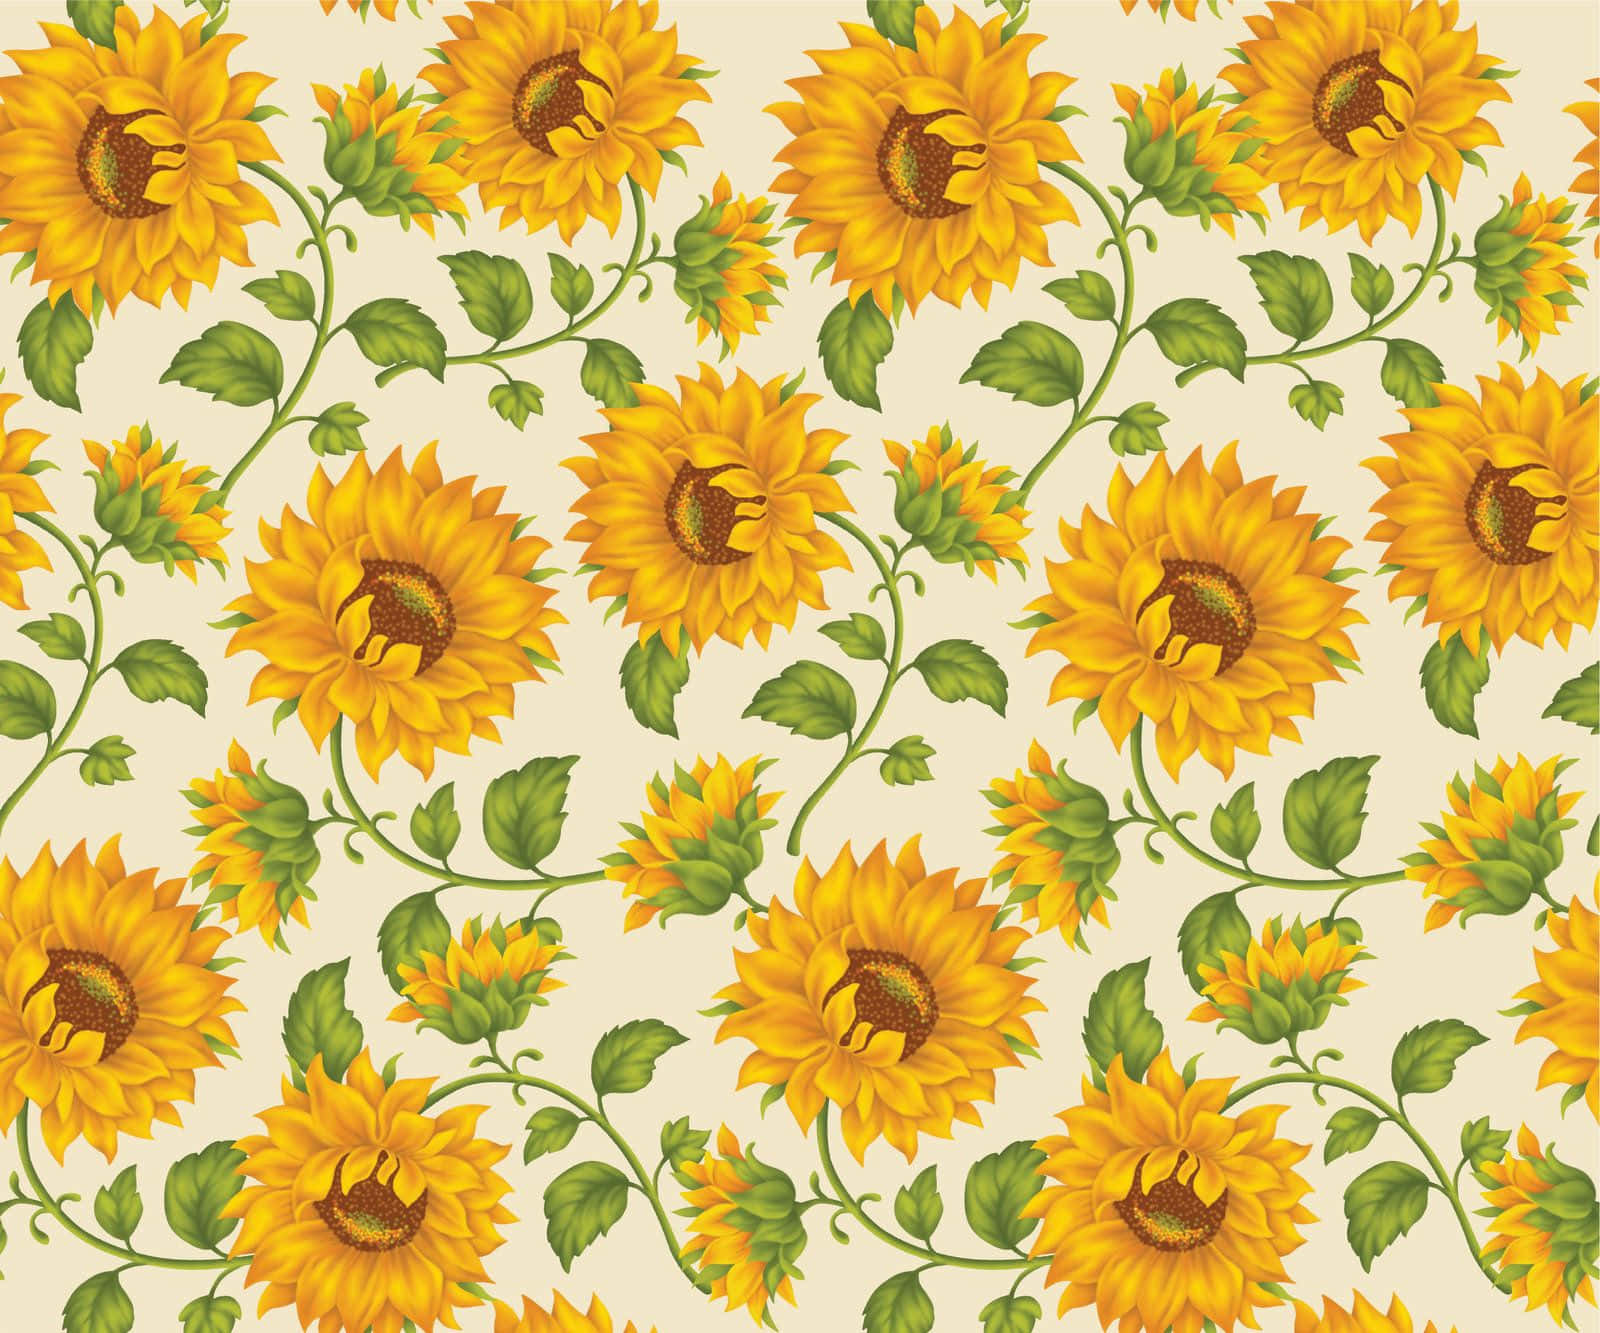 sunflowers pattern on a white background